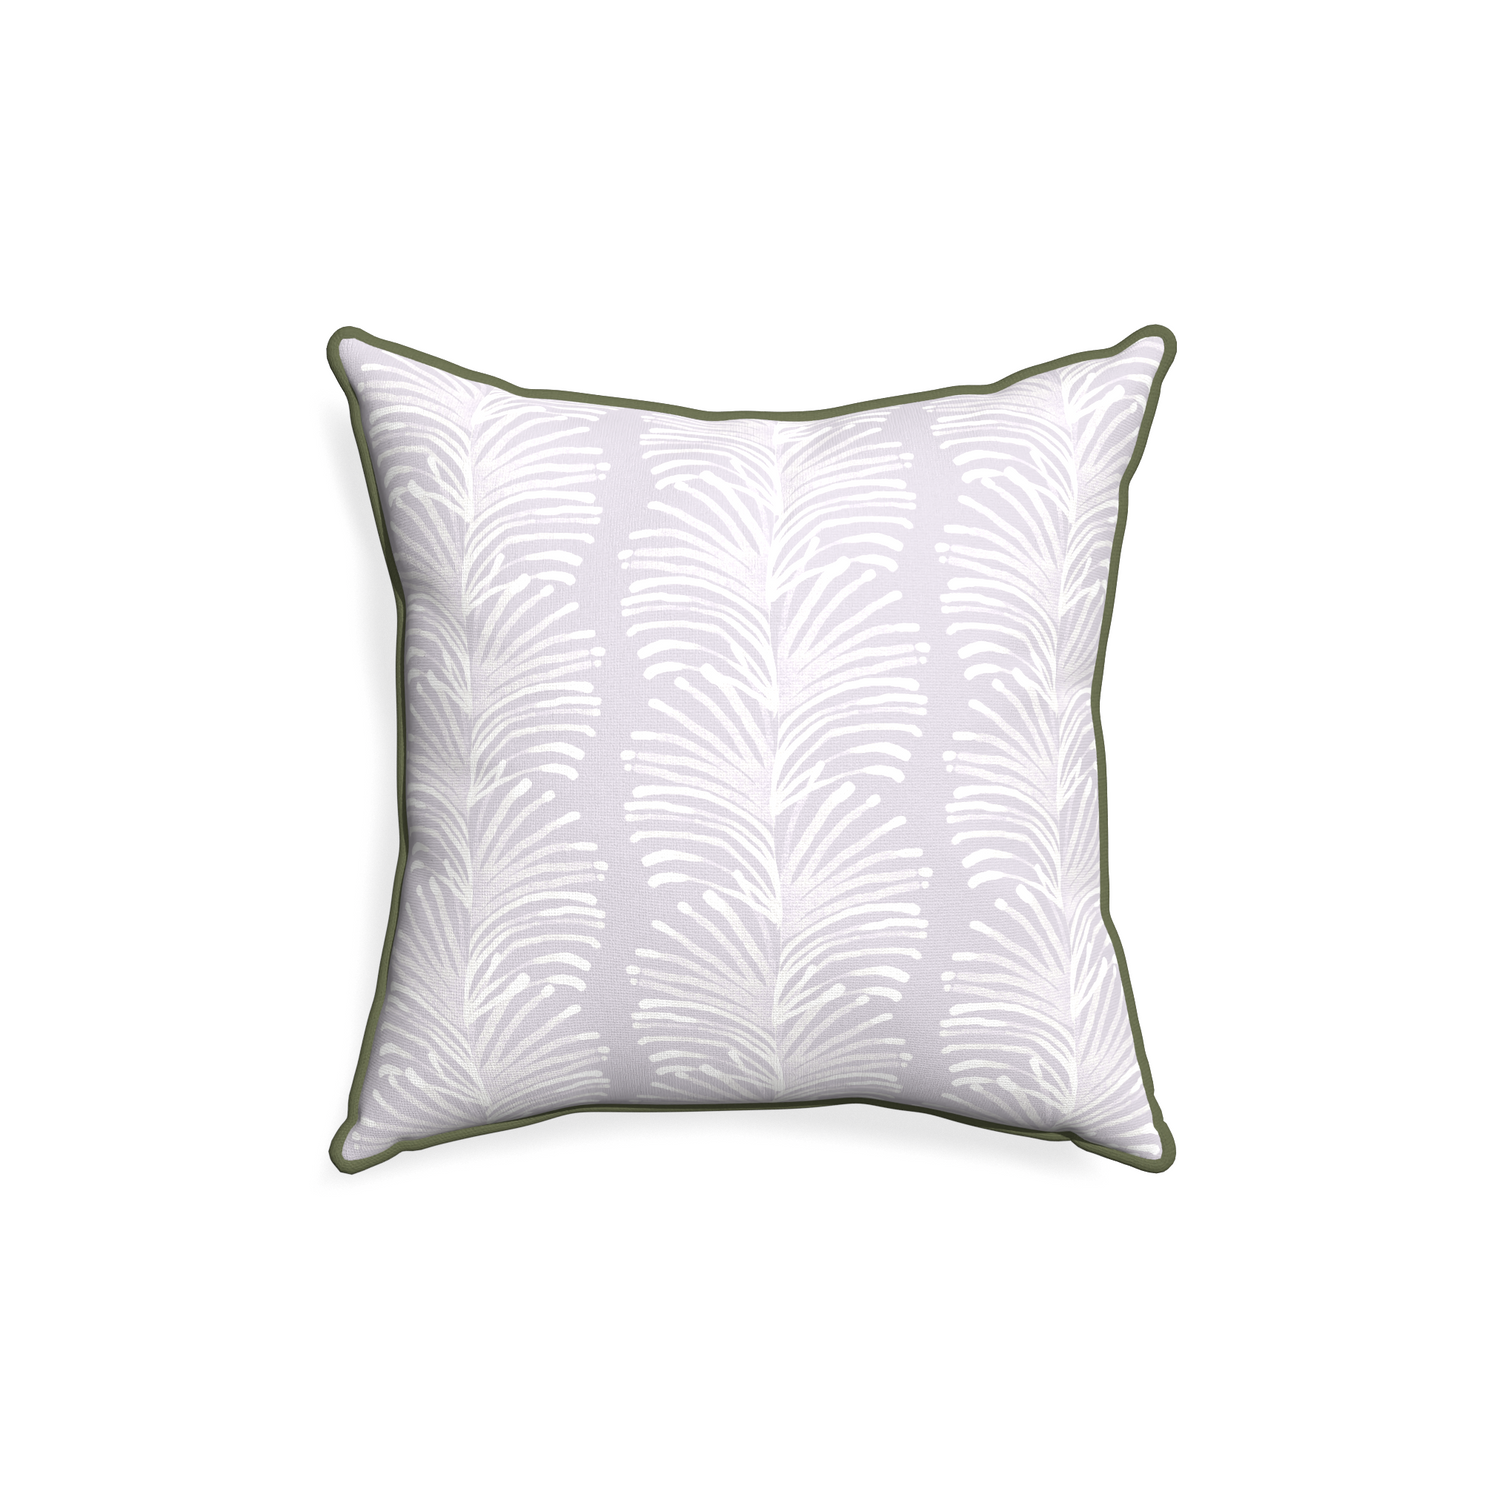 18-square emma lavender custom pillow with f piping on white background